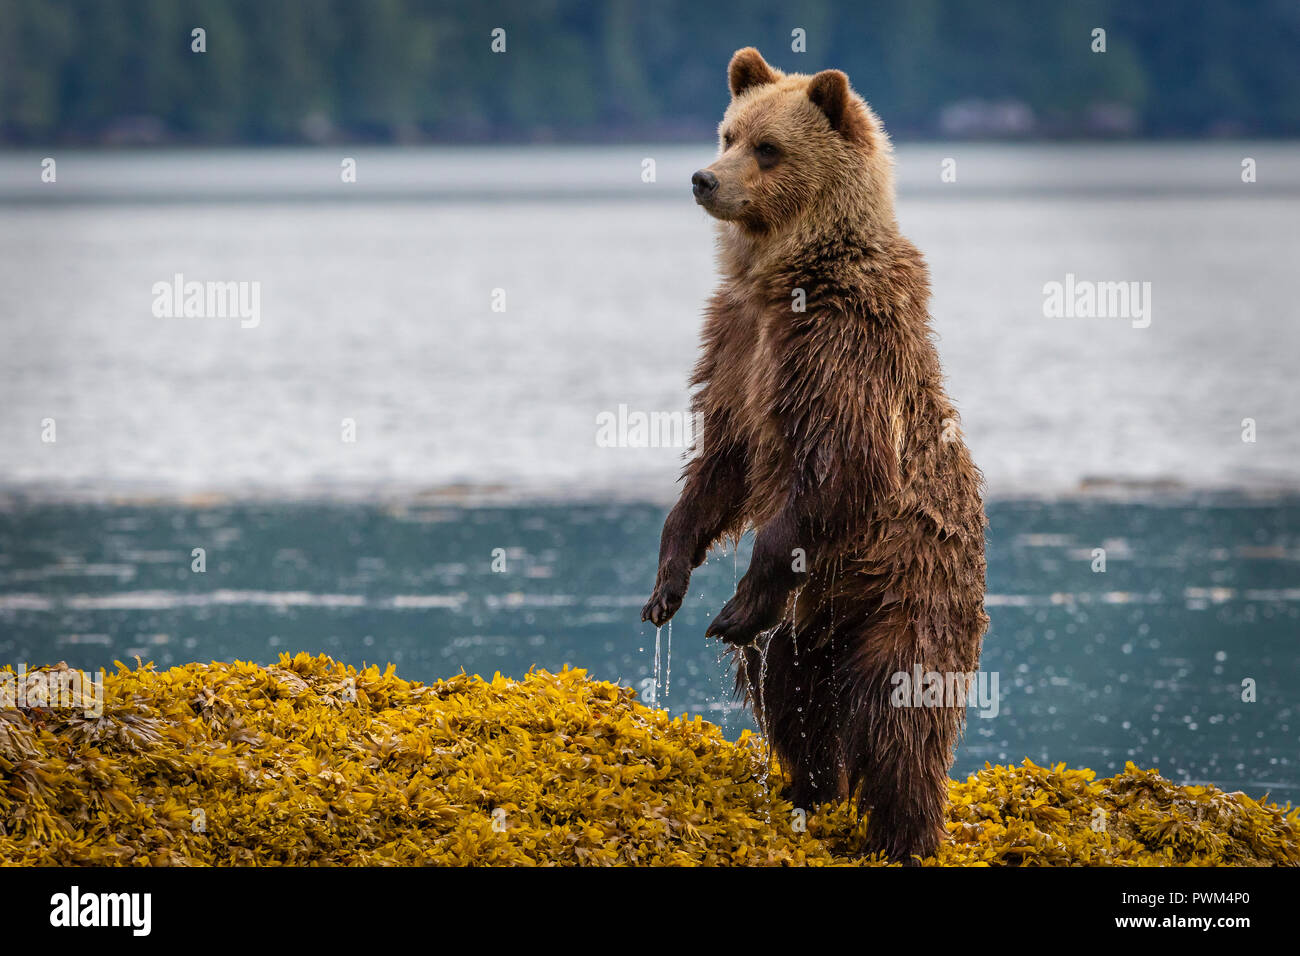 Cute grizzly bear cub standing up in seaweed looking for mom along the shoreline in Knight Inlet at low tide, First Nations Territory, British Columb Stock Photo